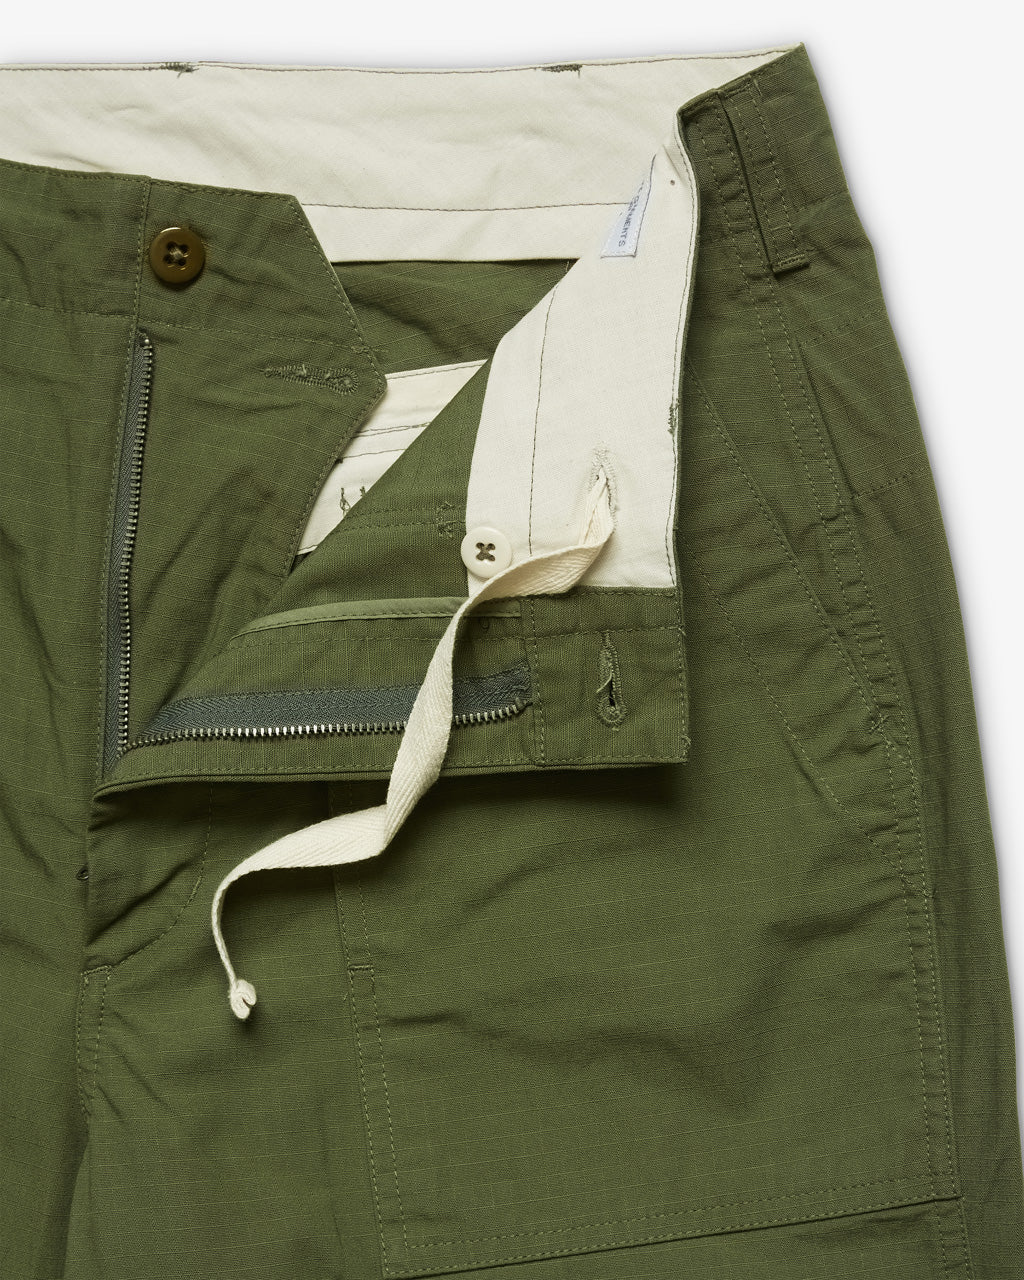 ENGINEERED GARMENTS | FATIGUE PANT OLIVE COTTON RIPSTOP | Supply & Advise